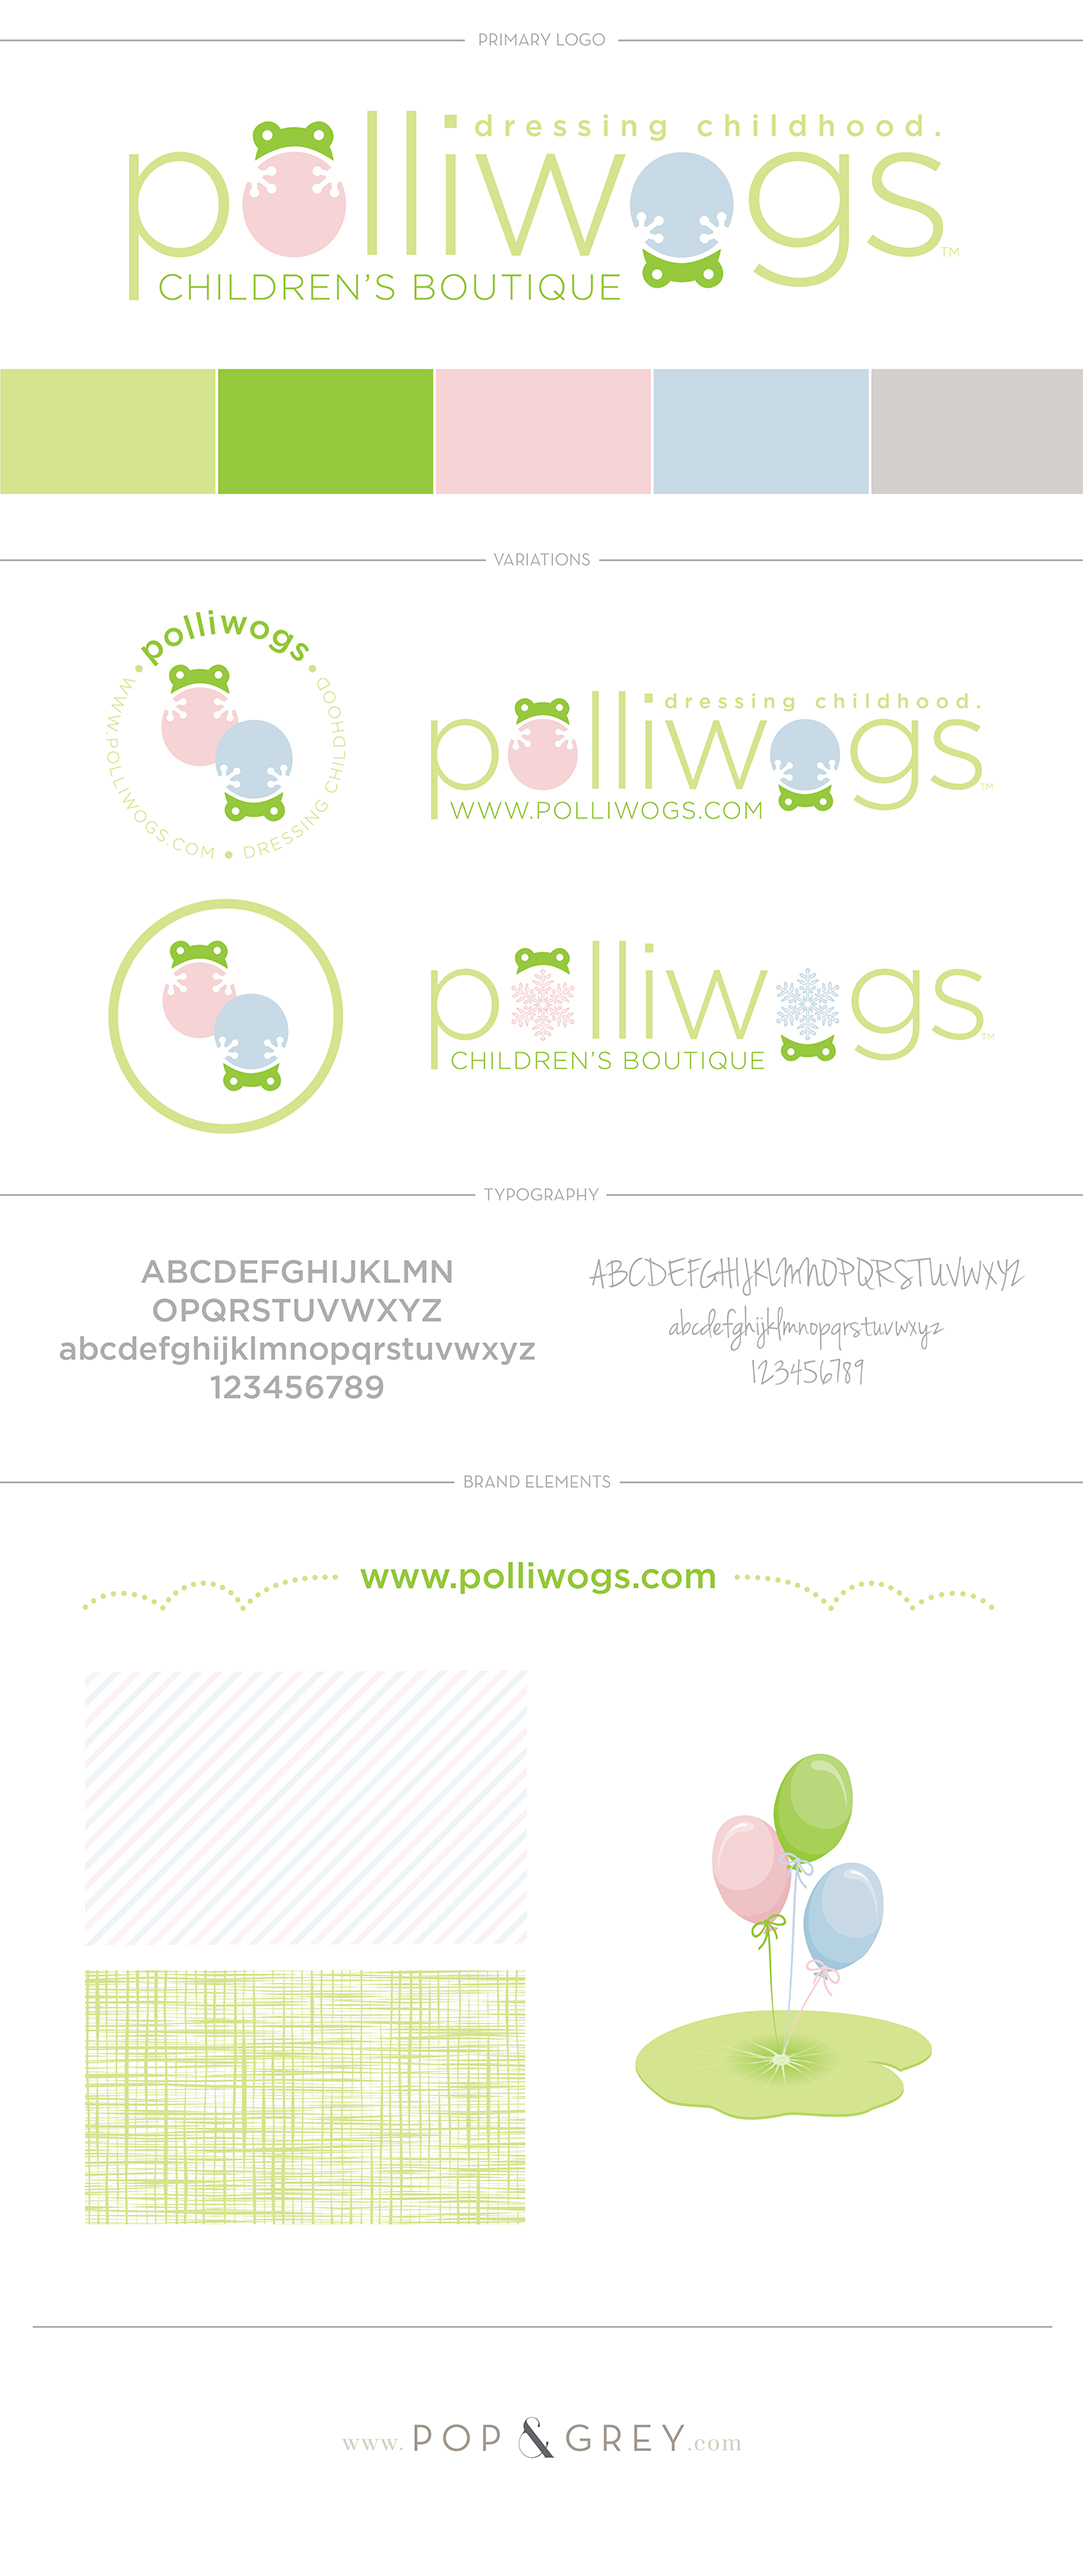 Brand Design for Polliwogs Children's Boutique by Pop and Grey